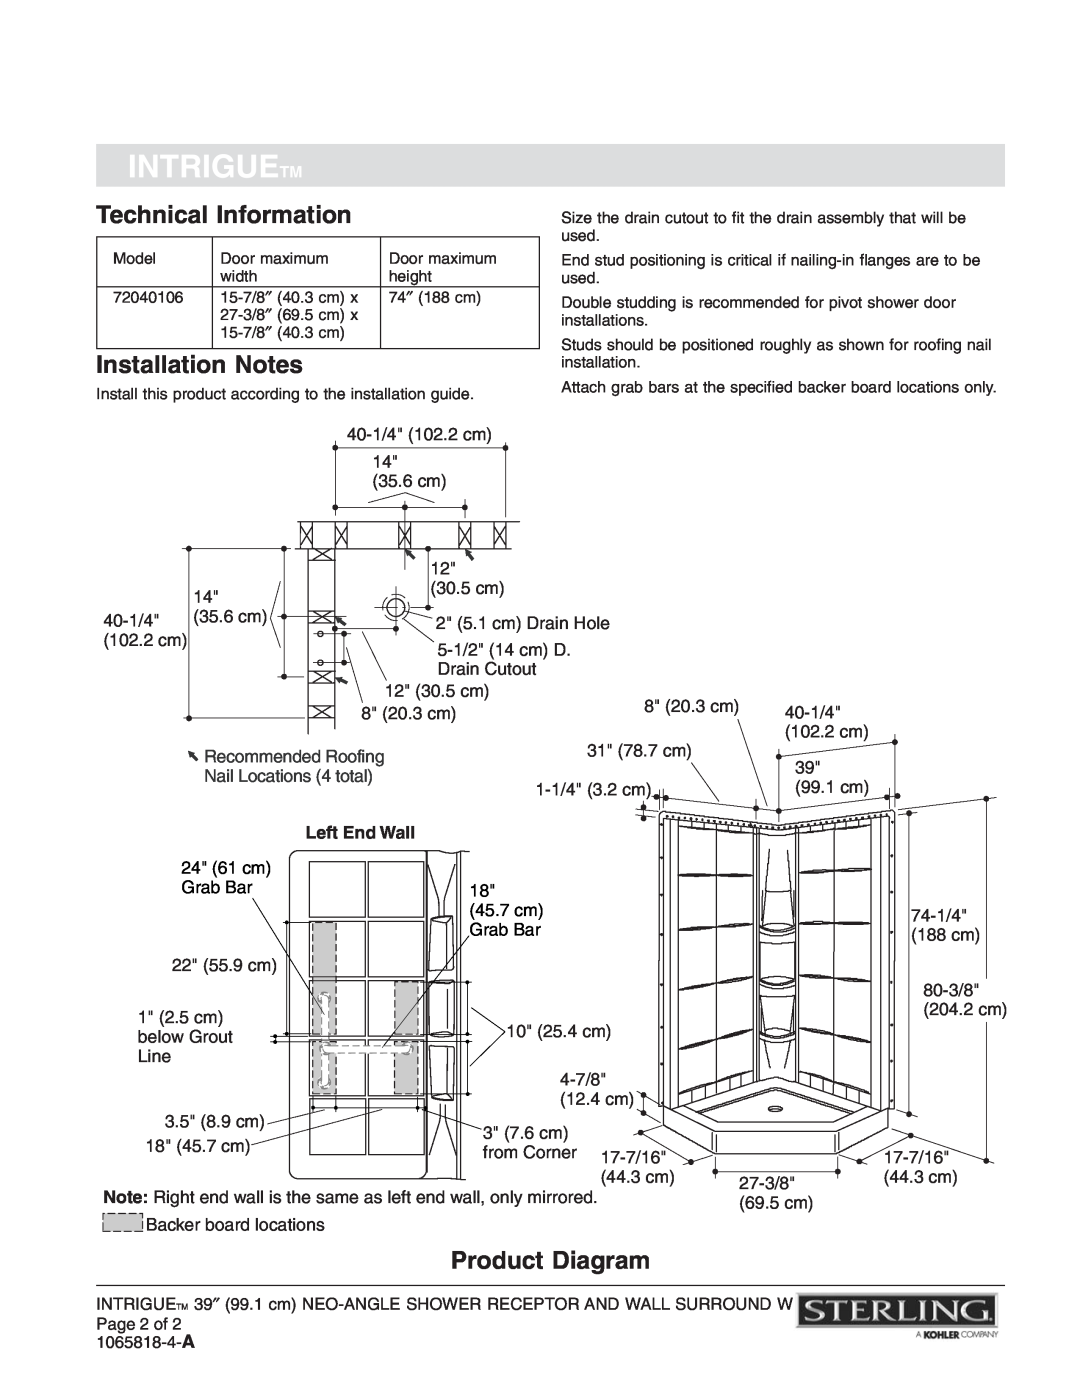 Sterling Plumbing 72040106 warranty Technical Information, Installation Notes, Product Diagram, Intriguetm, Left End Wall 